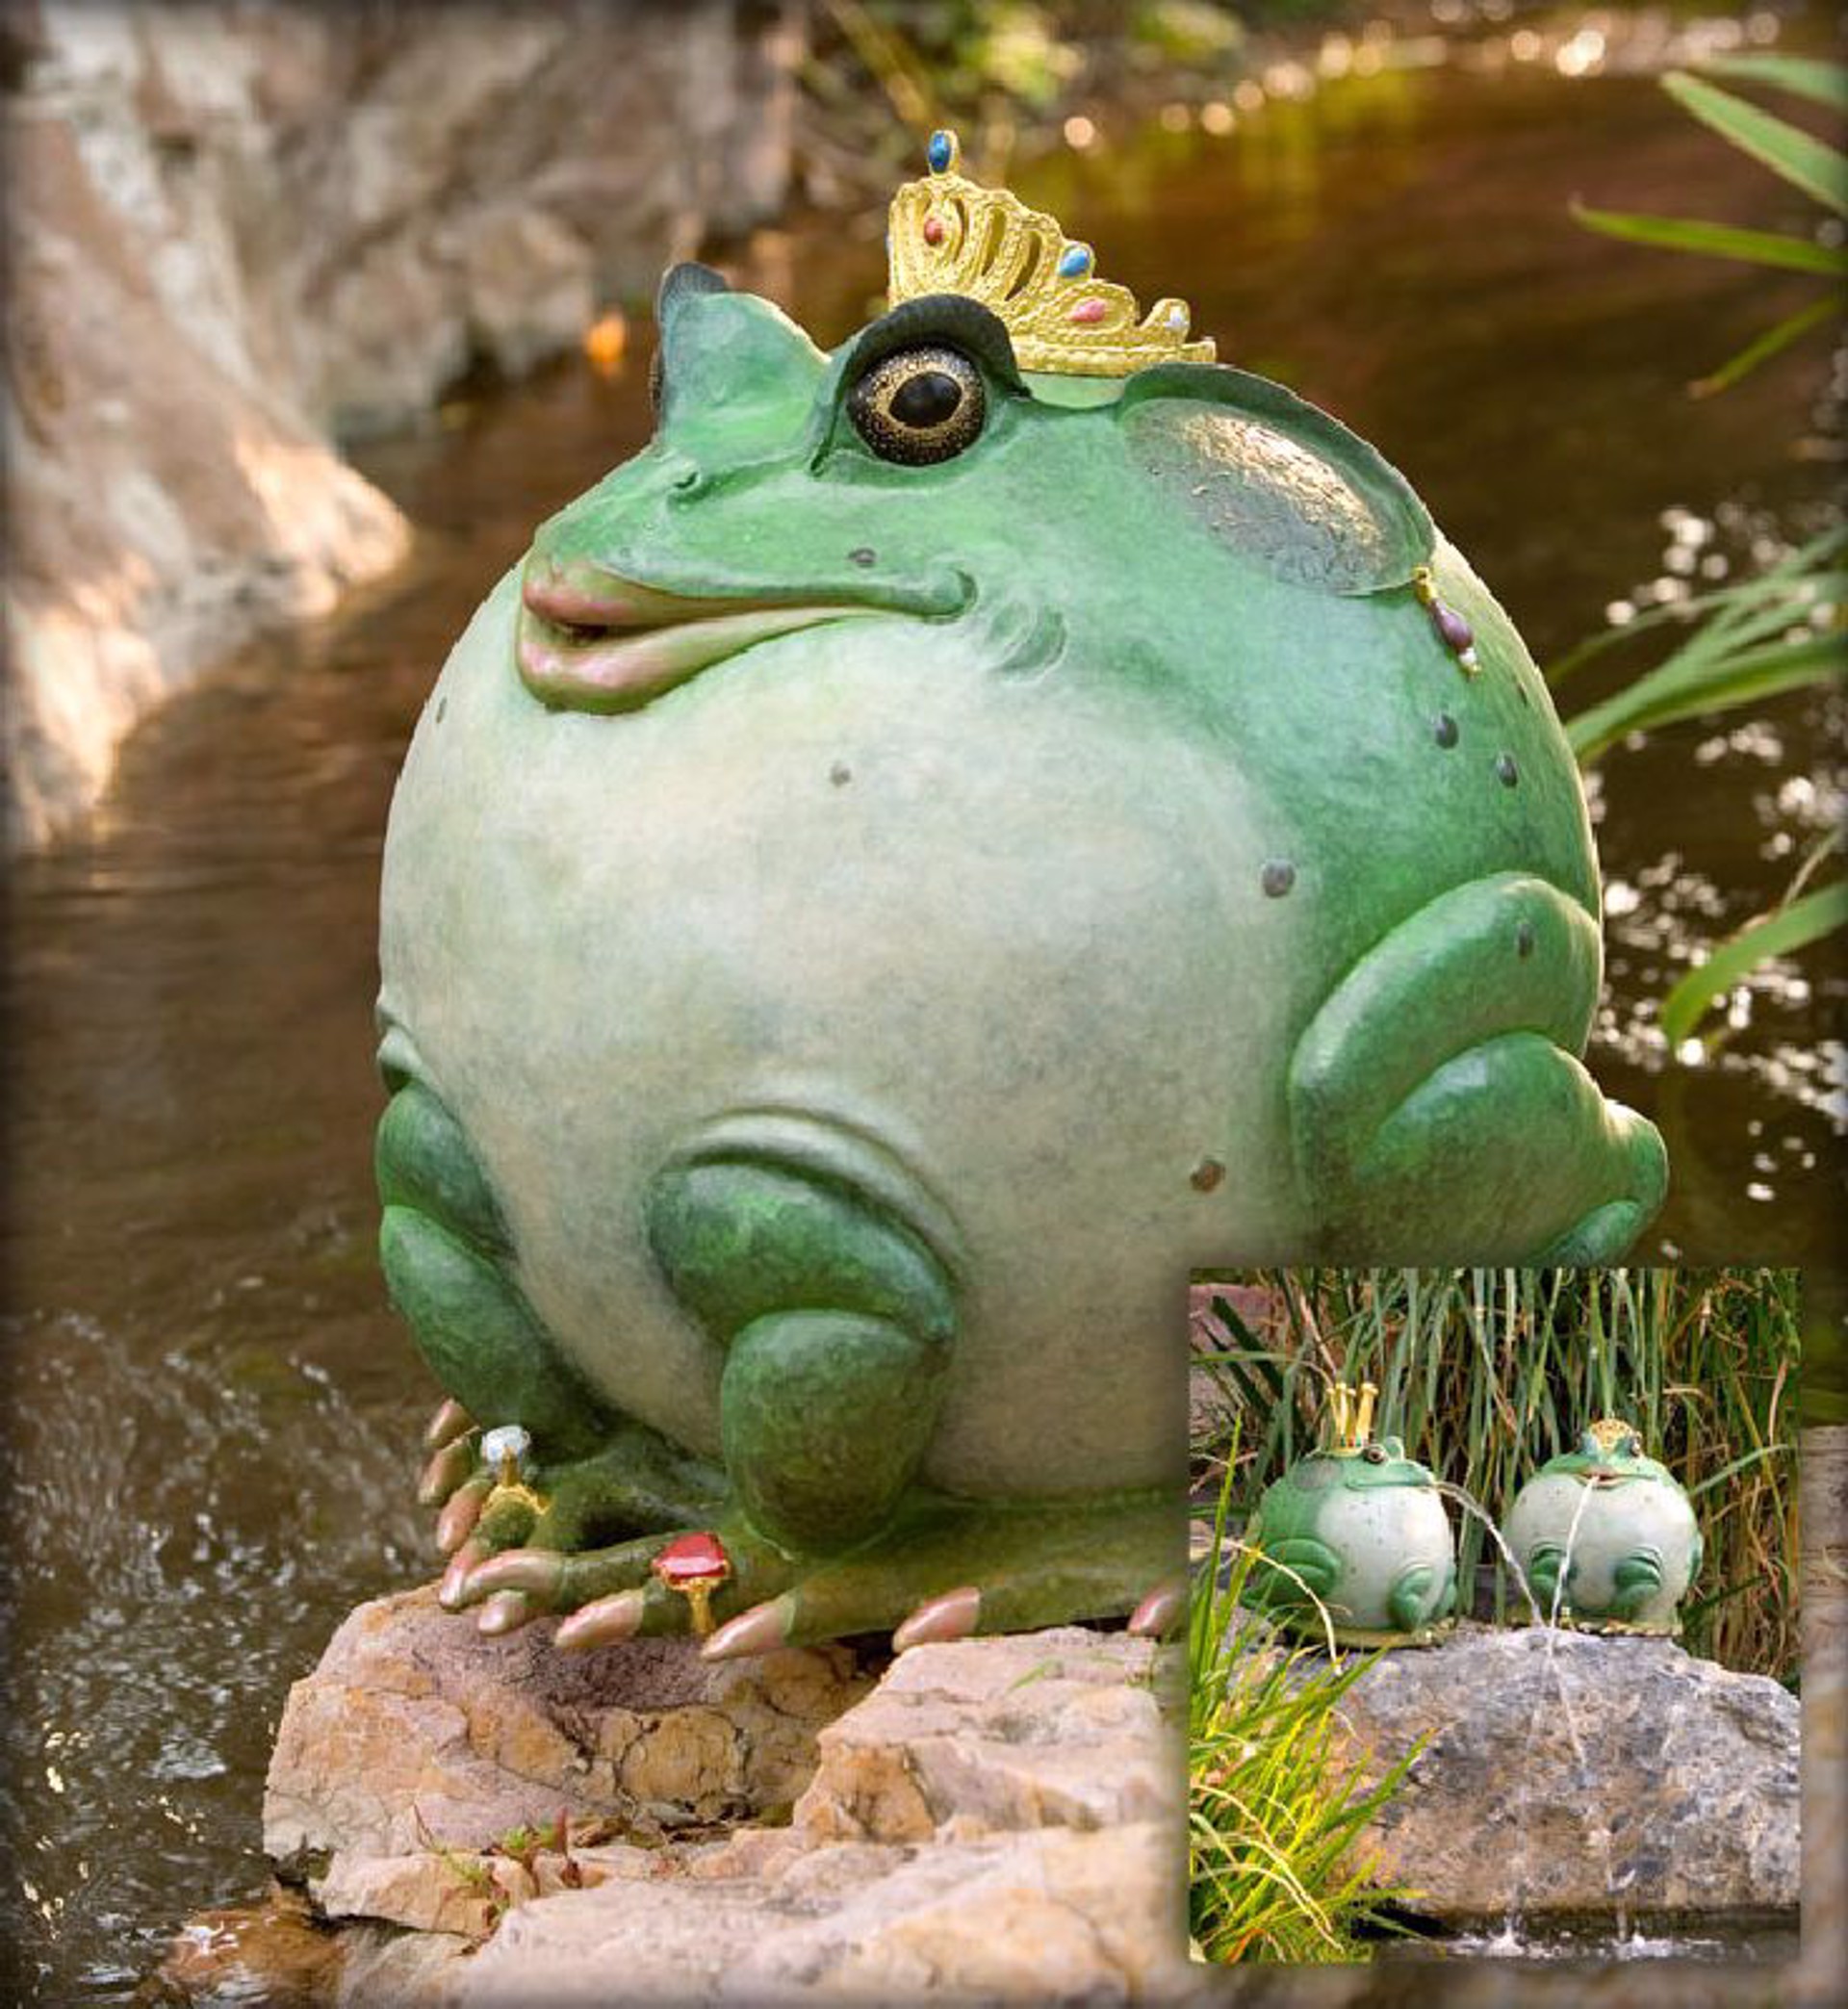 Puffed Up Princess by Gary Lee Price (sculptor)